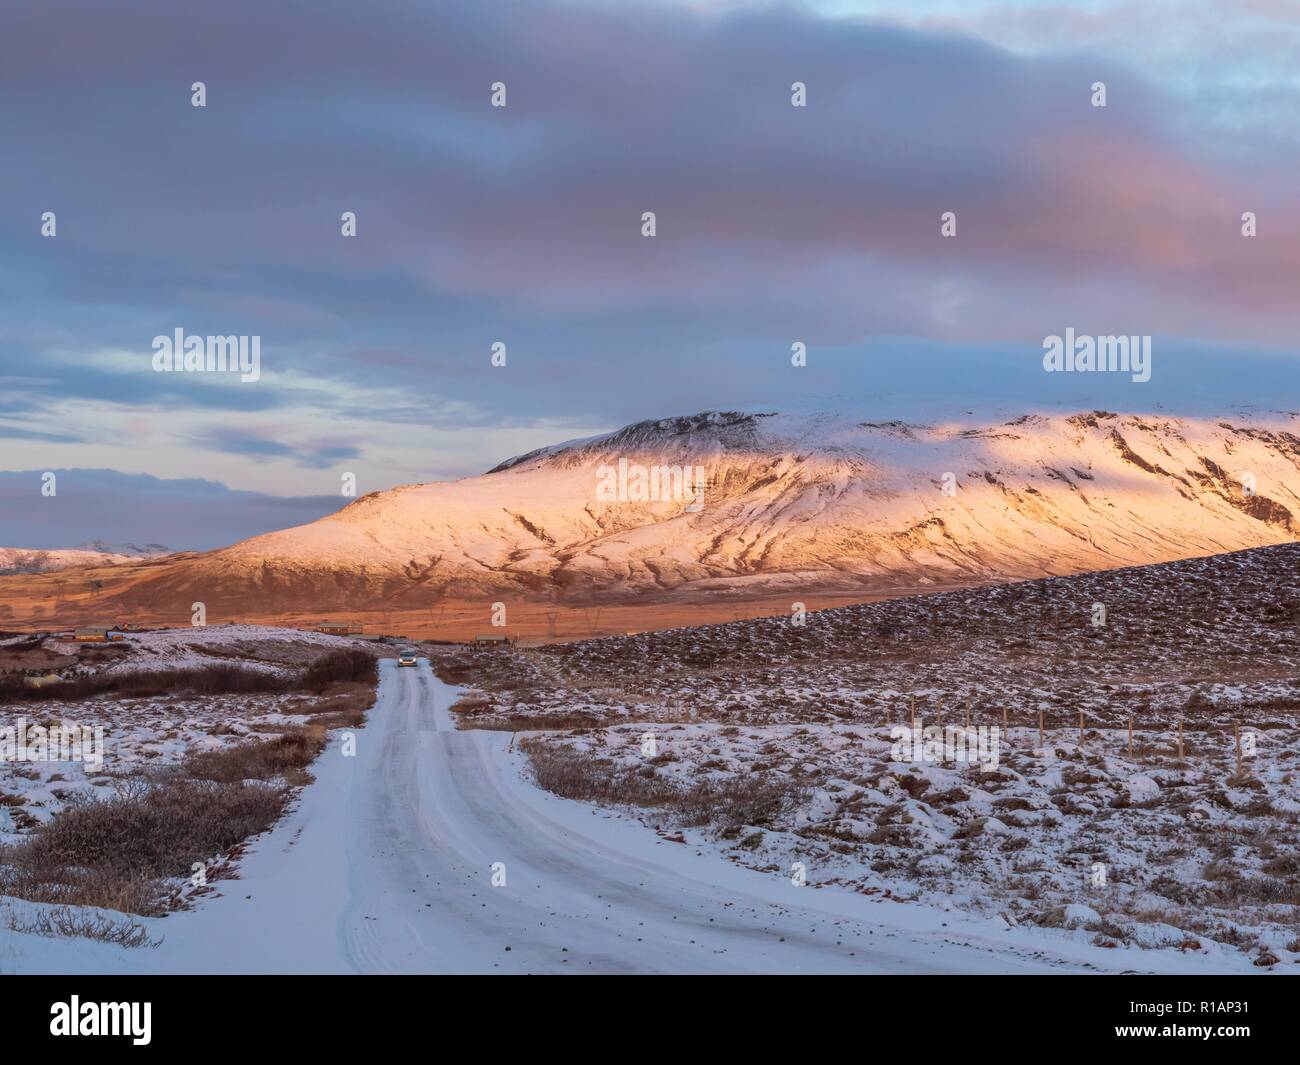 A snow covered road leading towards a sunlit mountain in Iceland Stock Photo